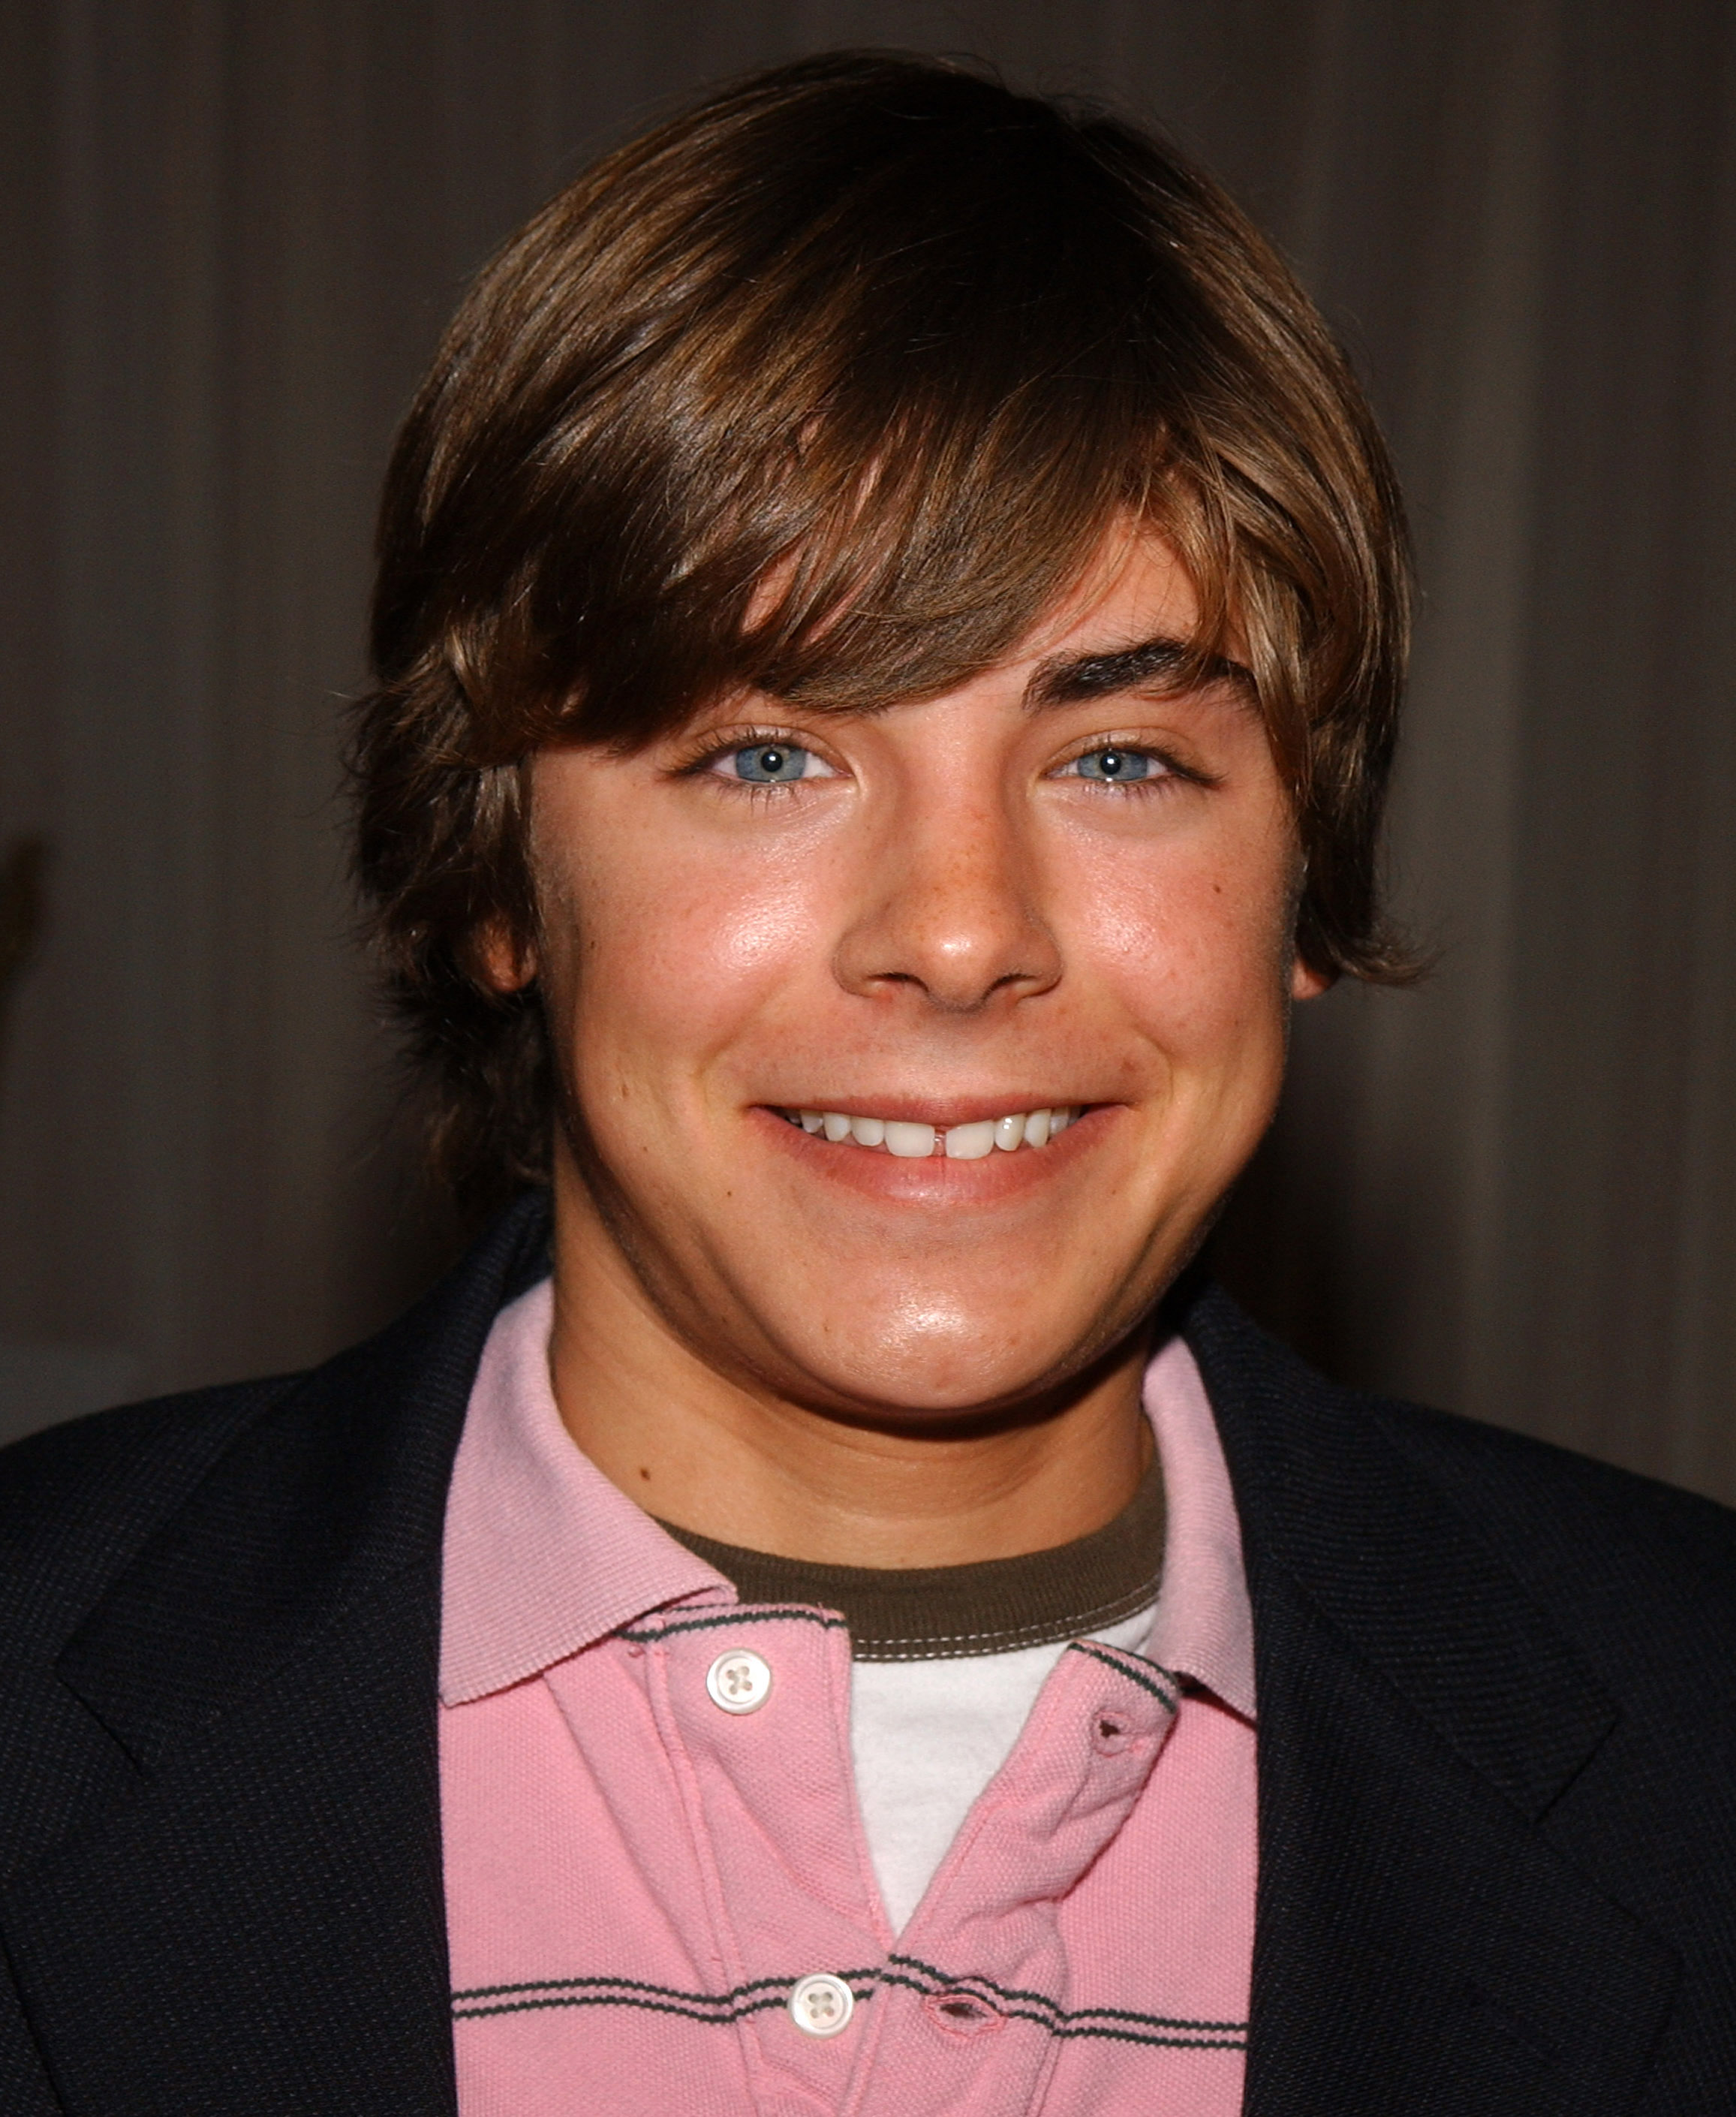 Zac Efron at the The 6th Annual Family Television Awards on December 1, 2004. | Source: Getty Images